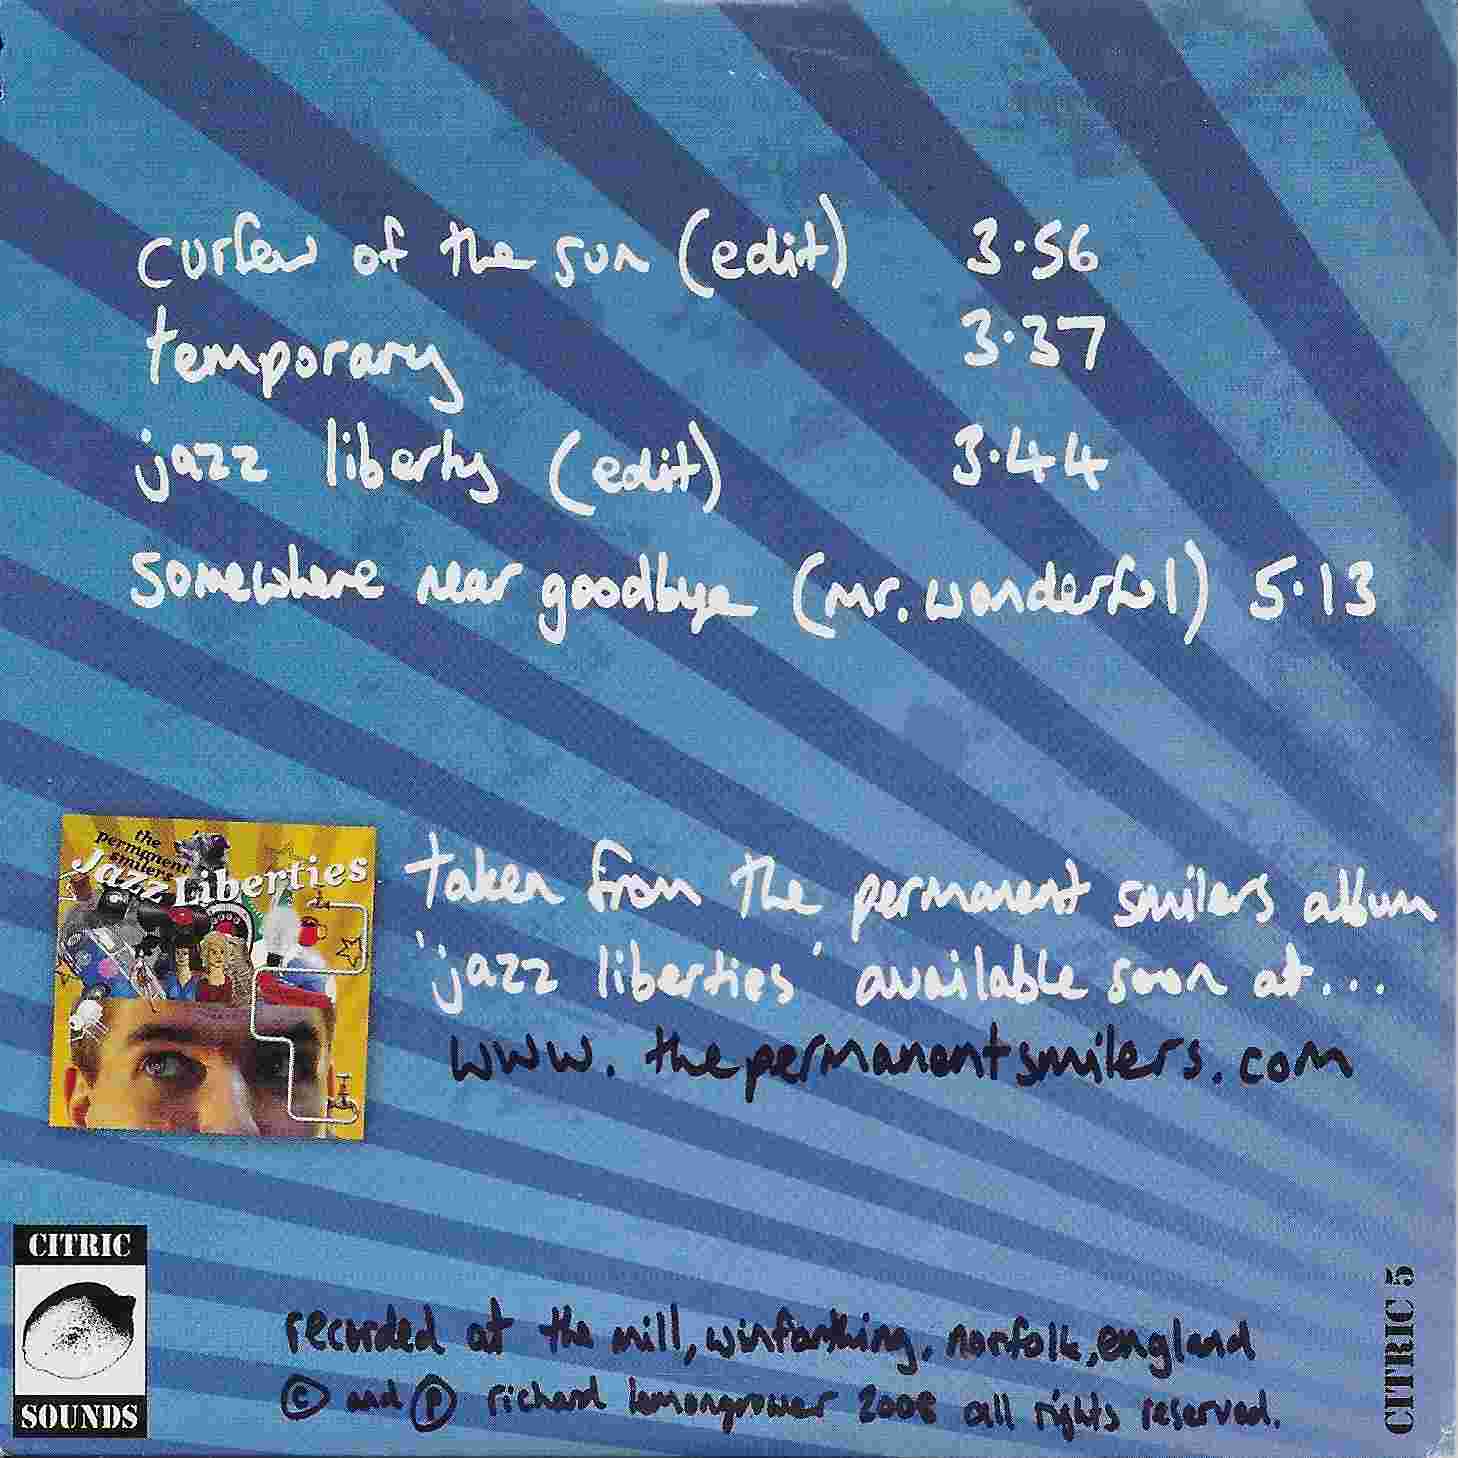 Back cover of CITRIC 5